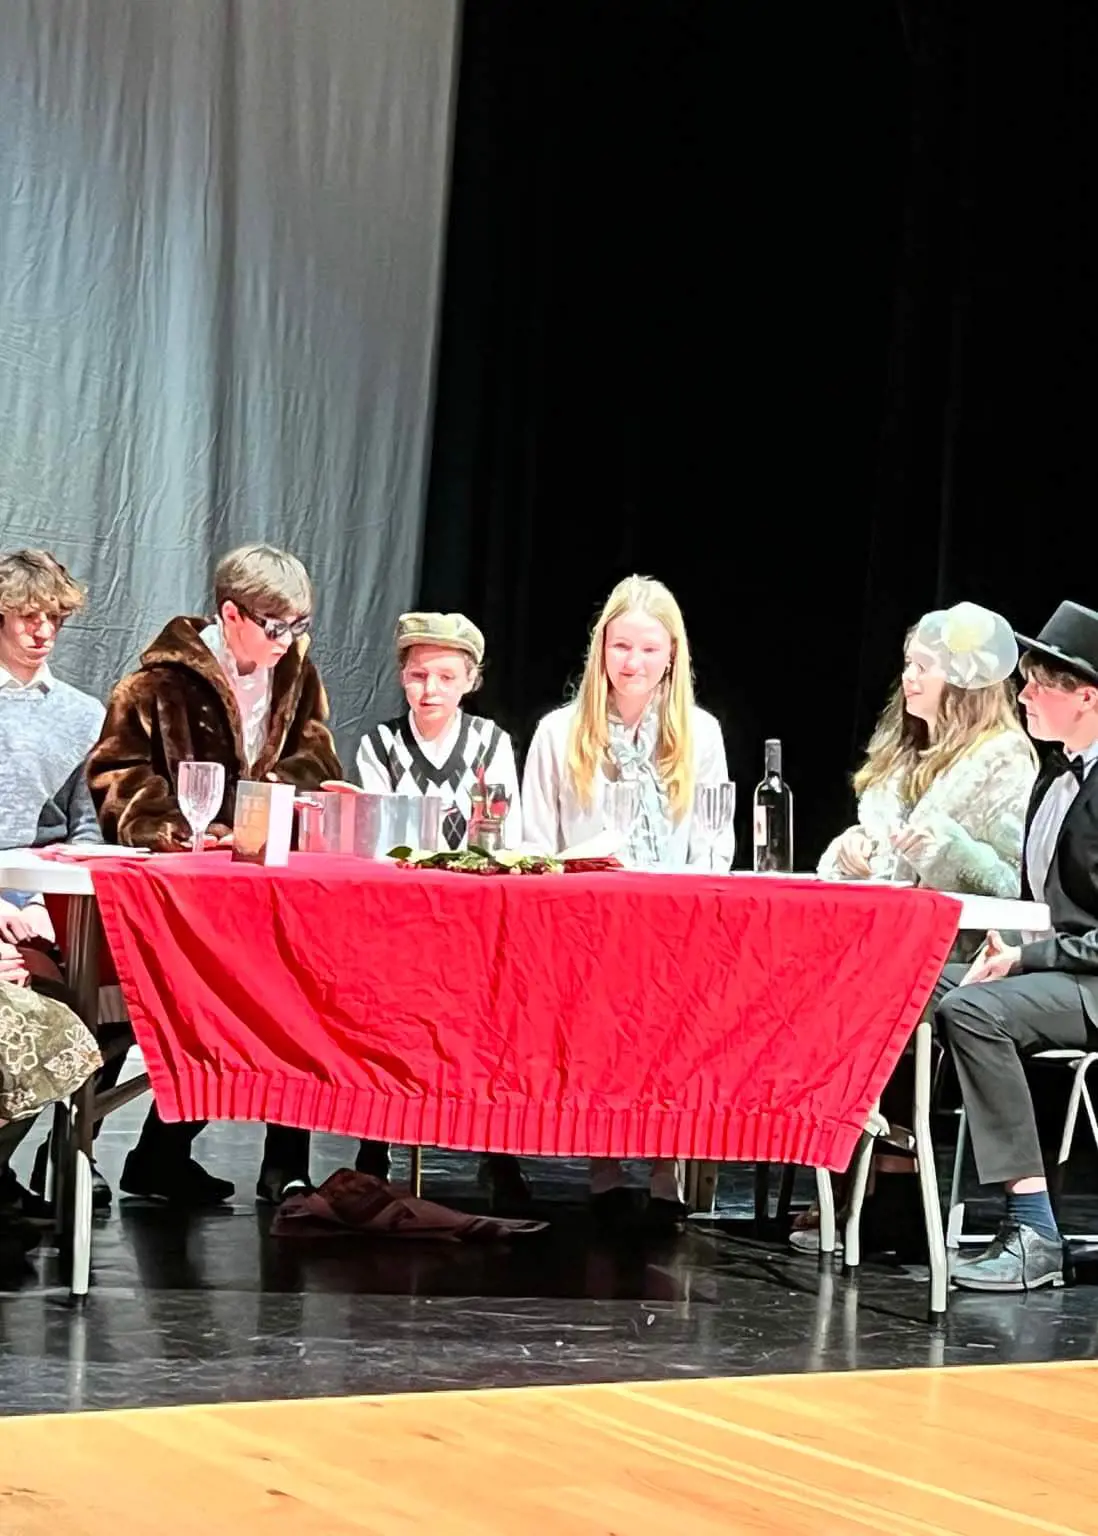 The Ibstock Place School House Drama Competition was a storming success across the Houses. Montefiore House won with Rage to Riches, written and directed by Emily and assisted by Sadie. 